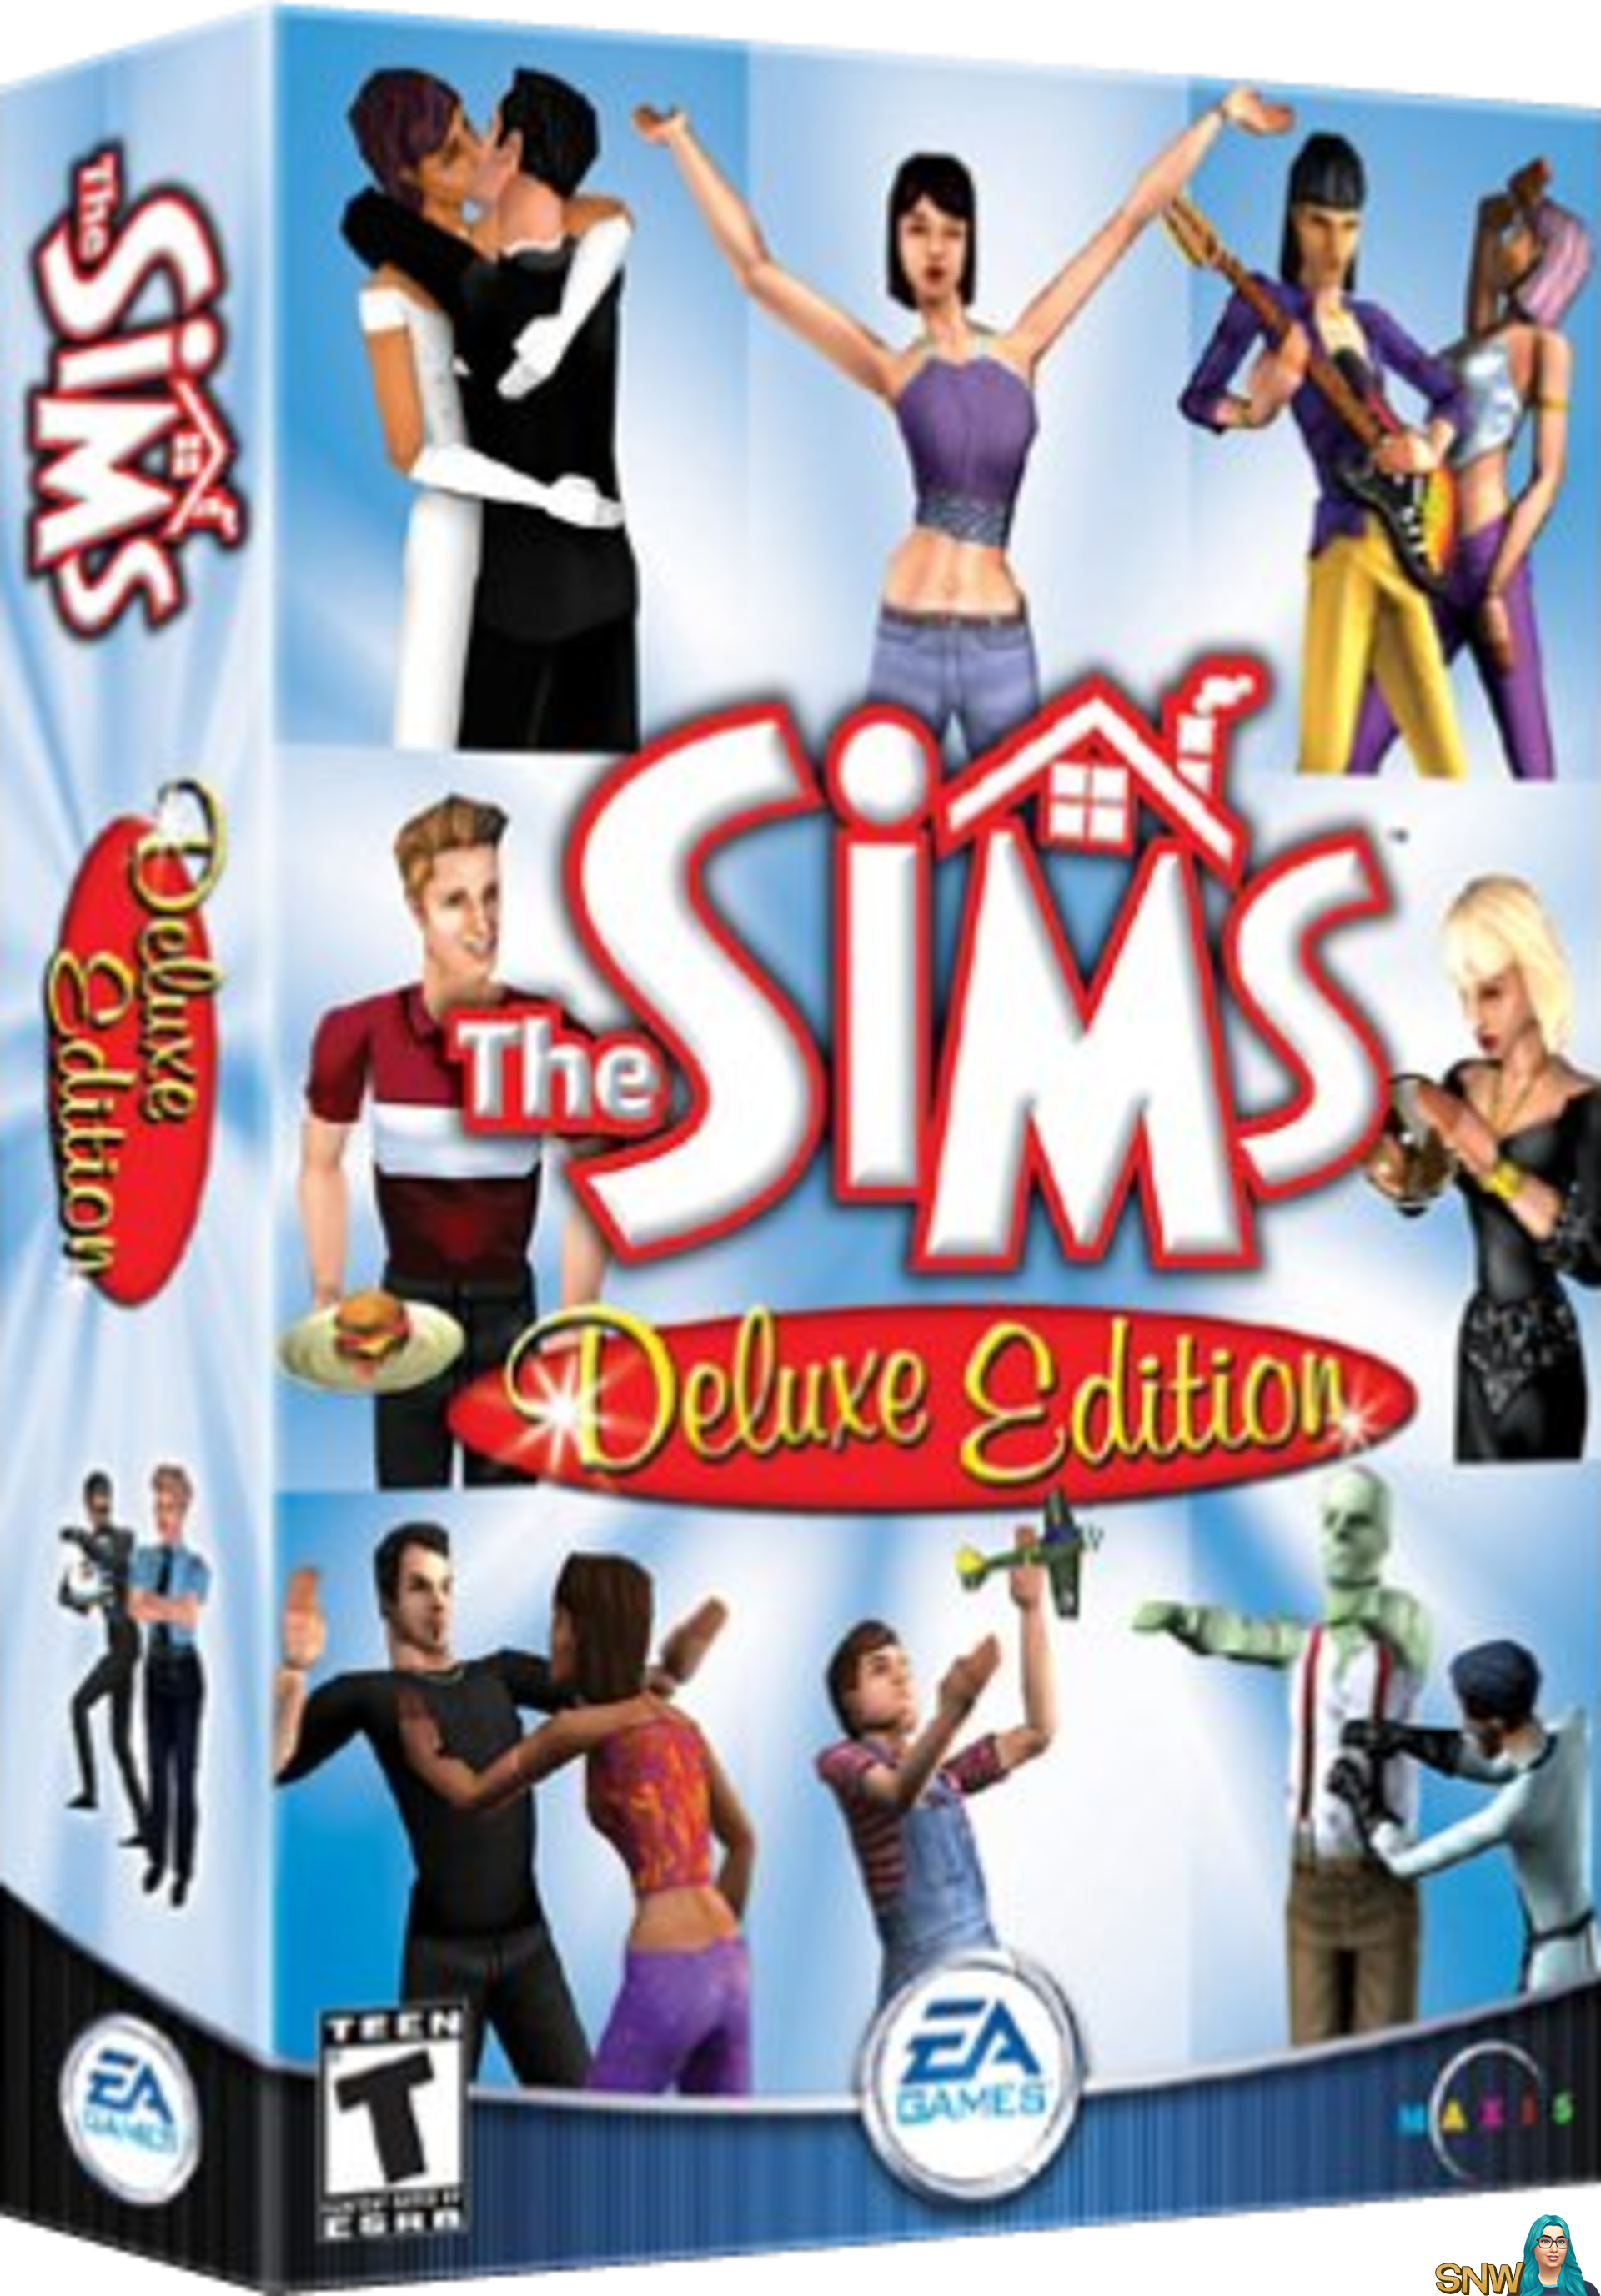 The Sims: Deluxe Edition | SNW | SimsNetwork.com